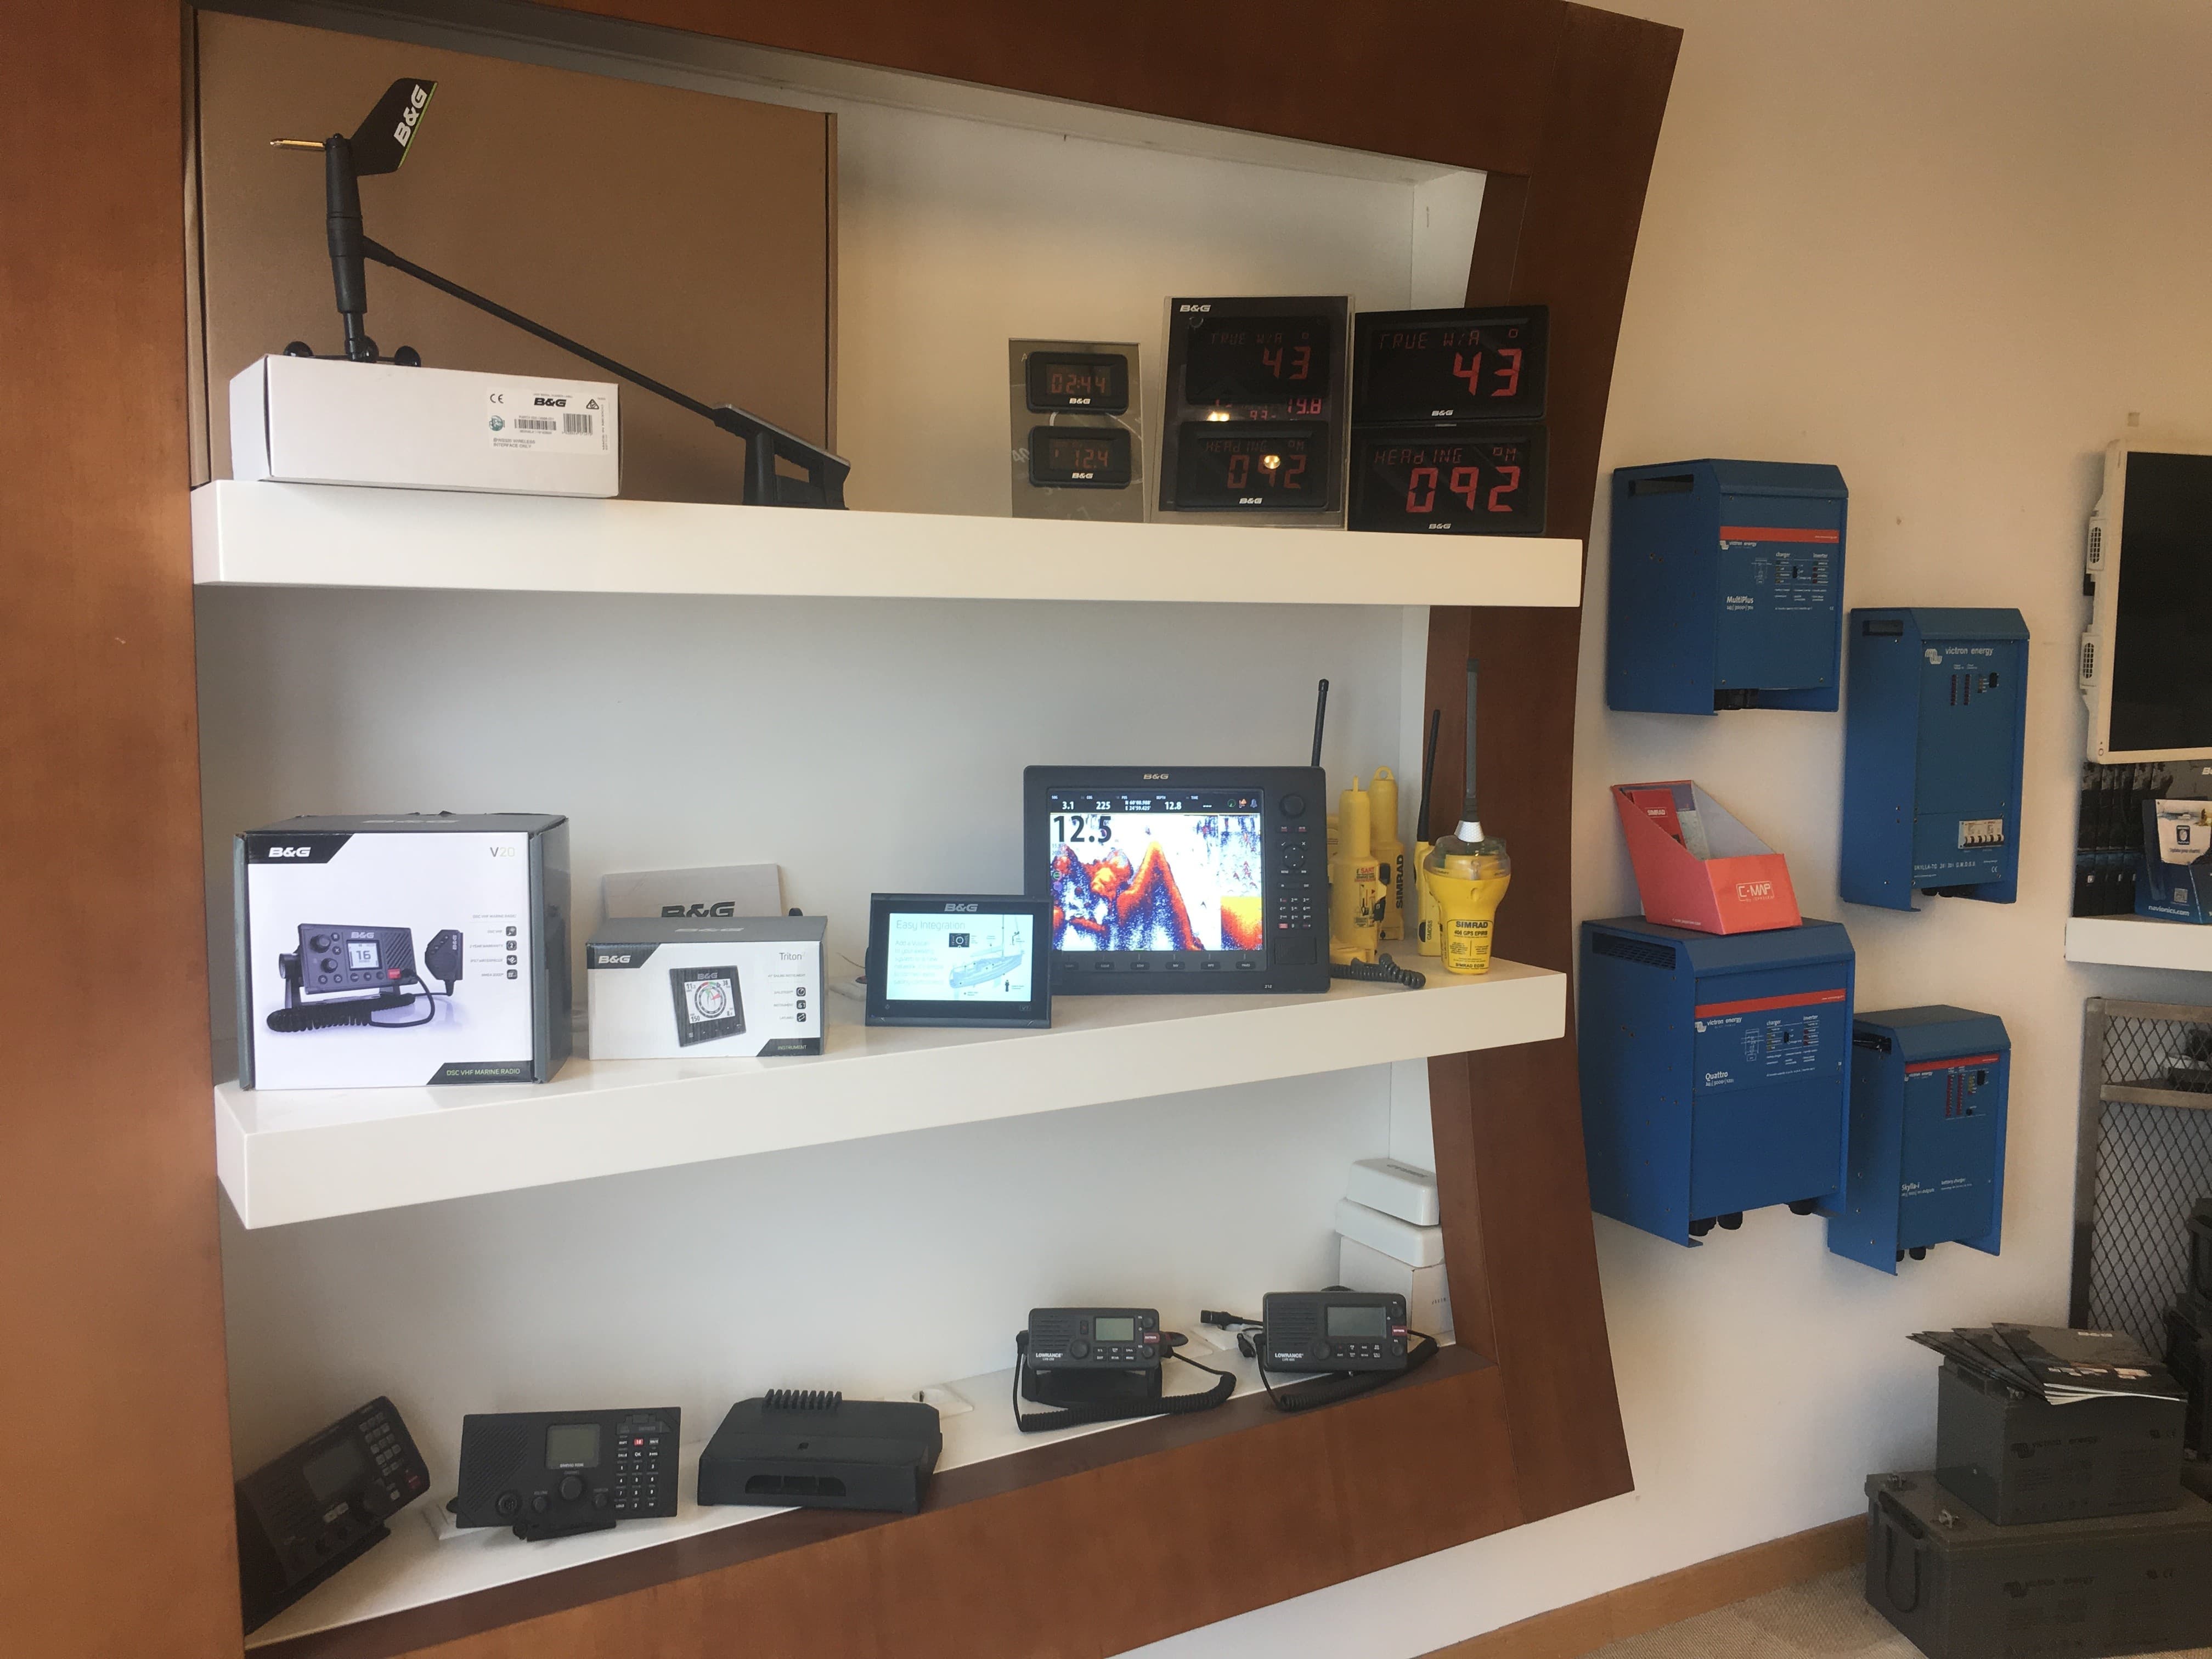 Three shelves of electronic devices for sale